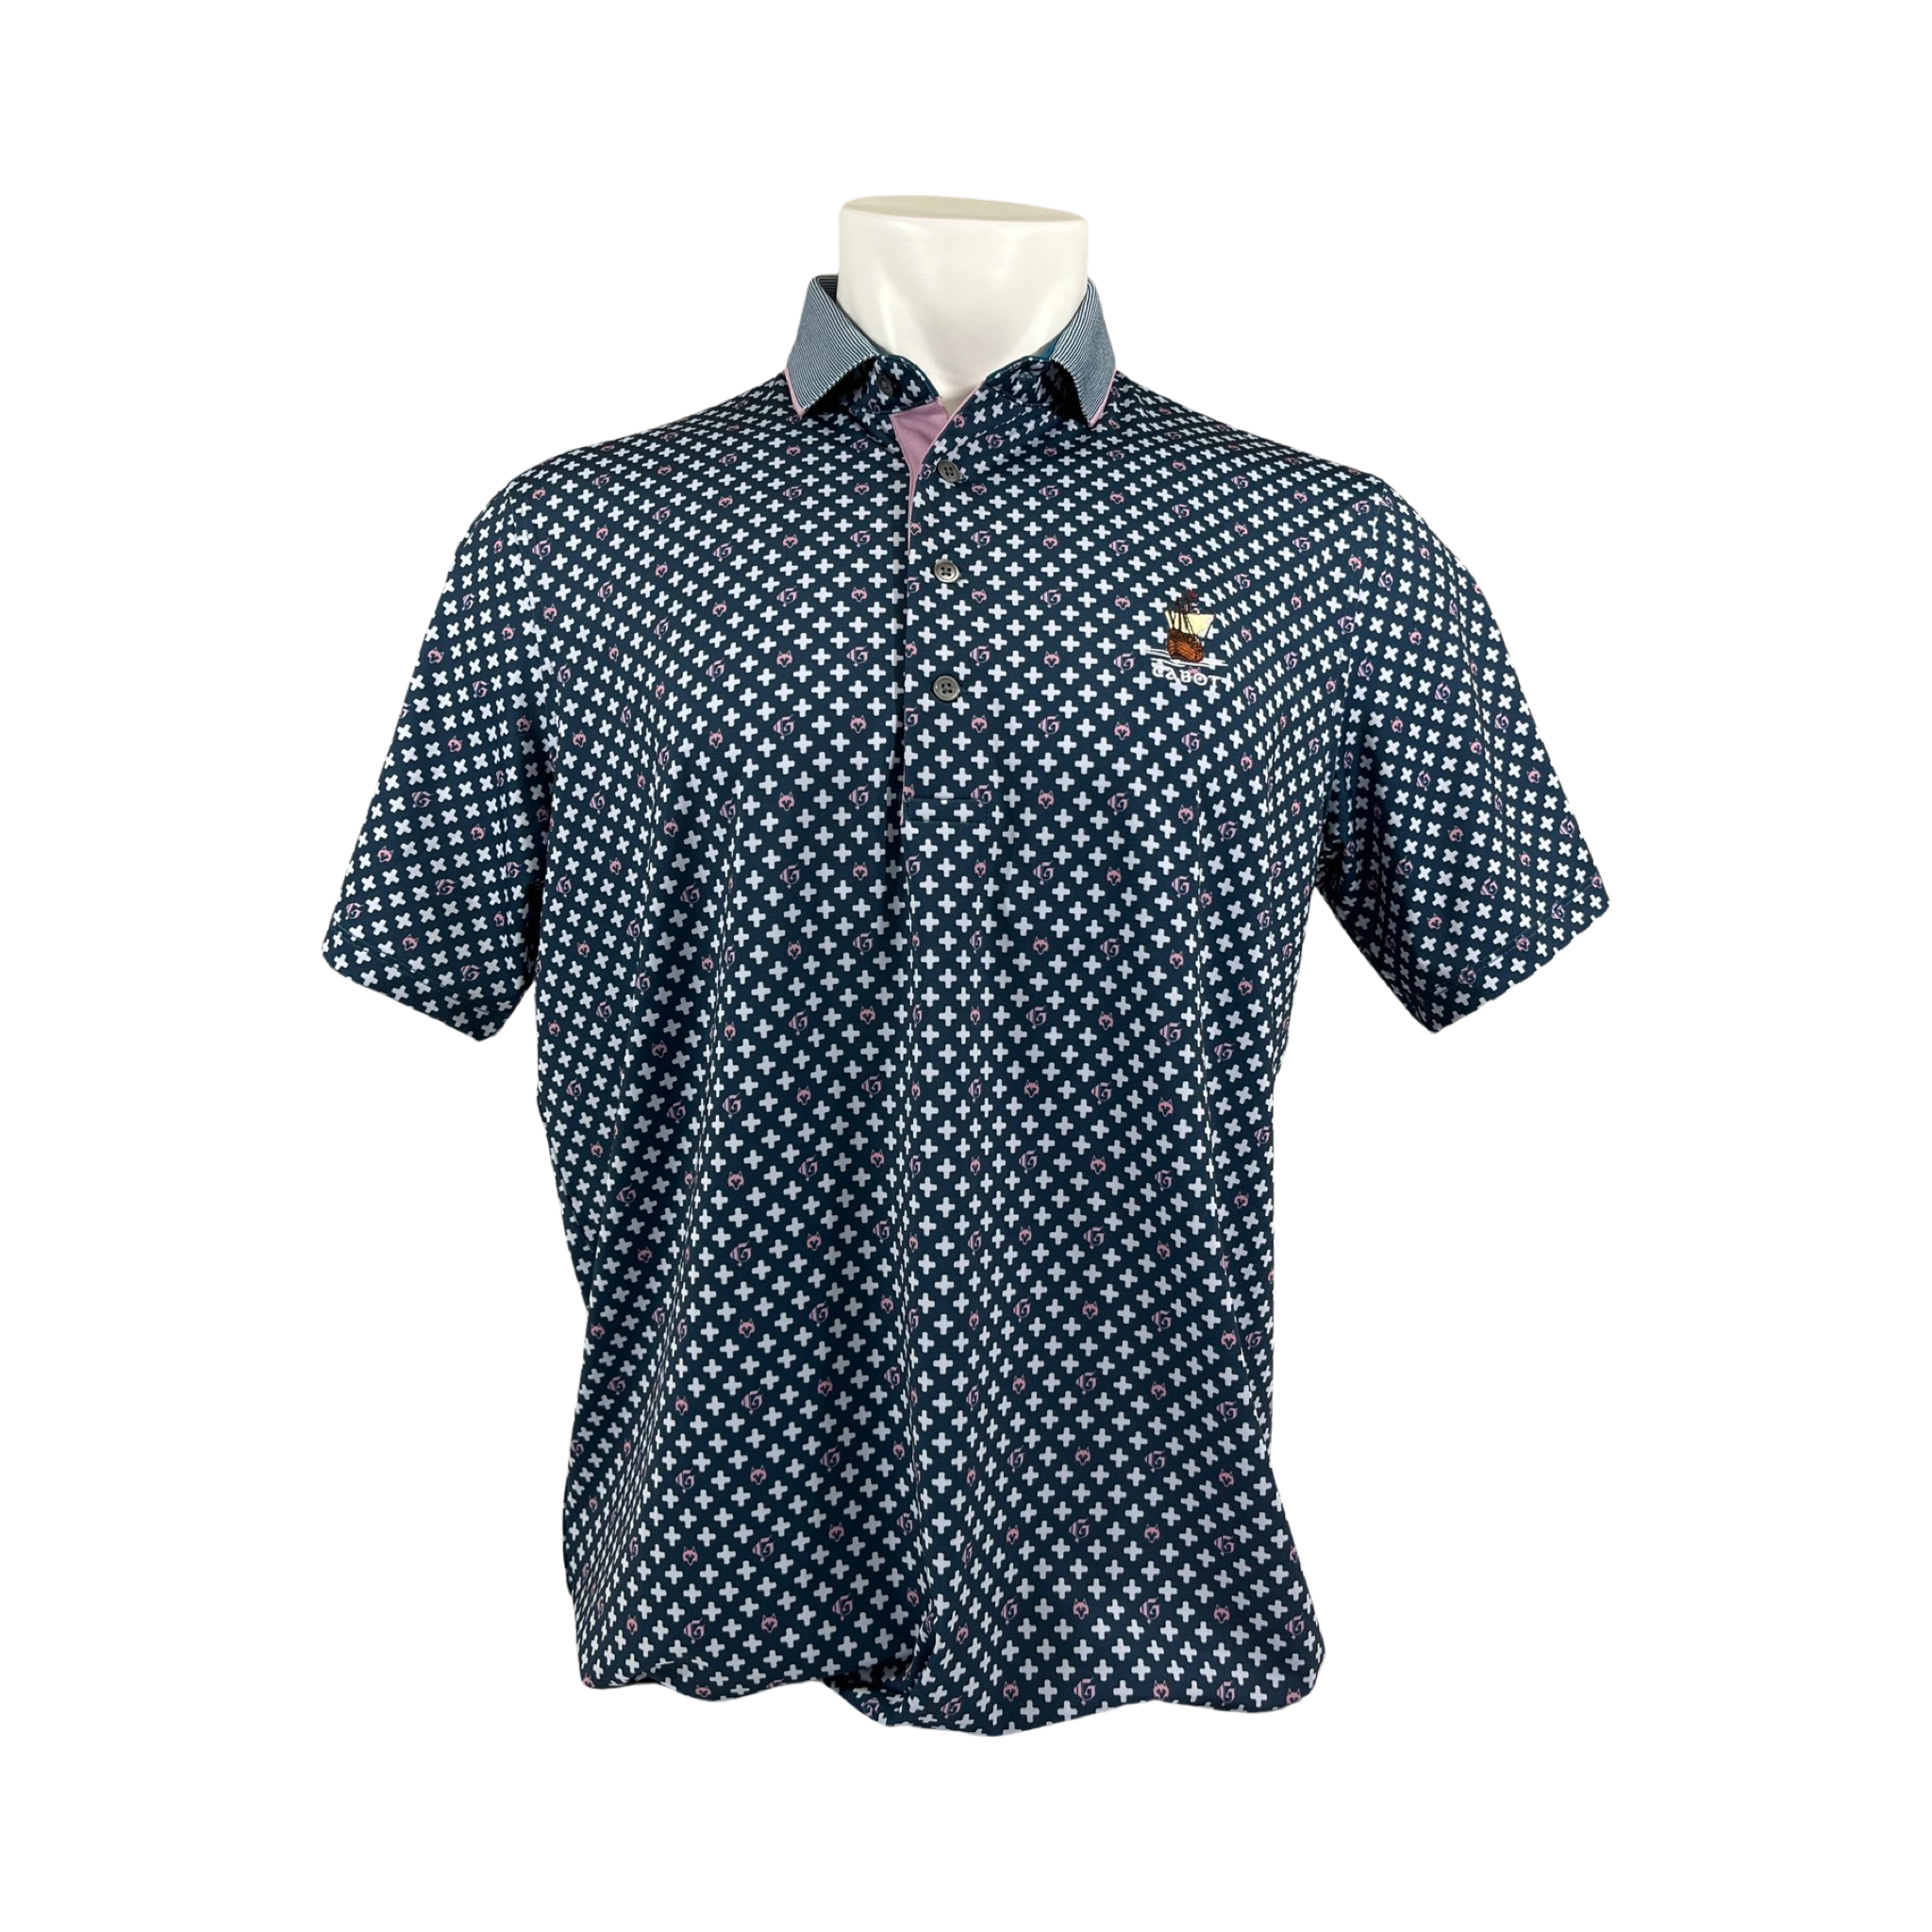 Greyson Cabot Links Pack Mentality Polo